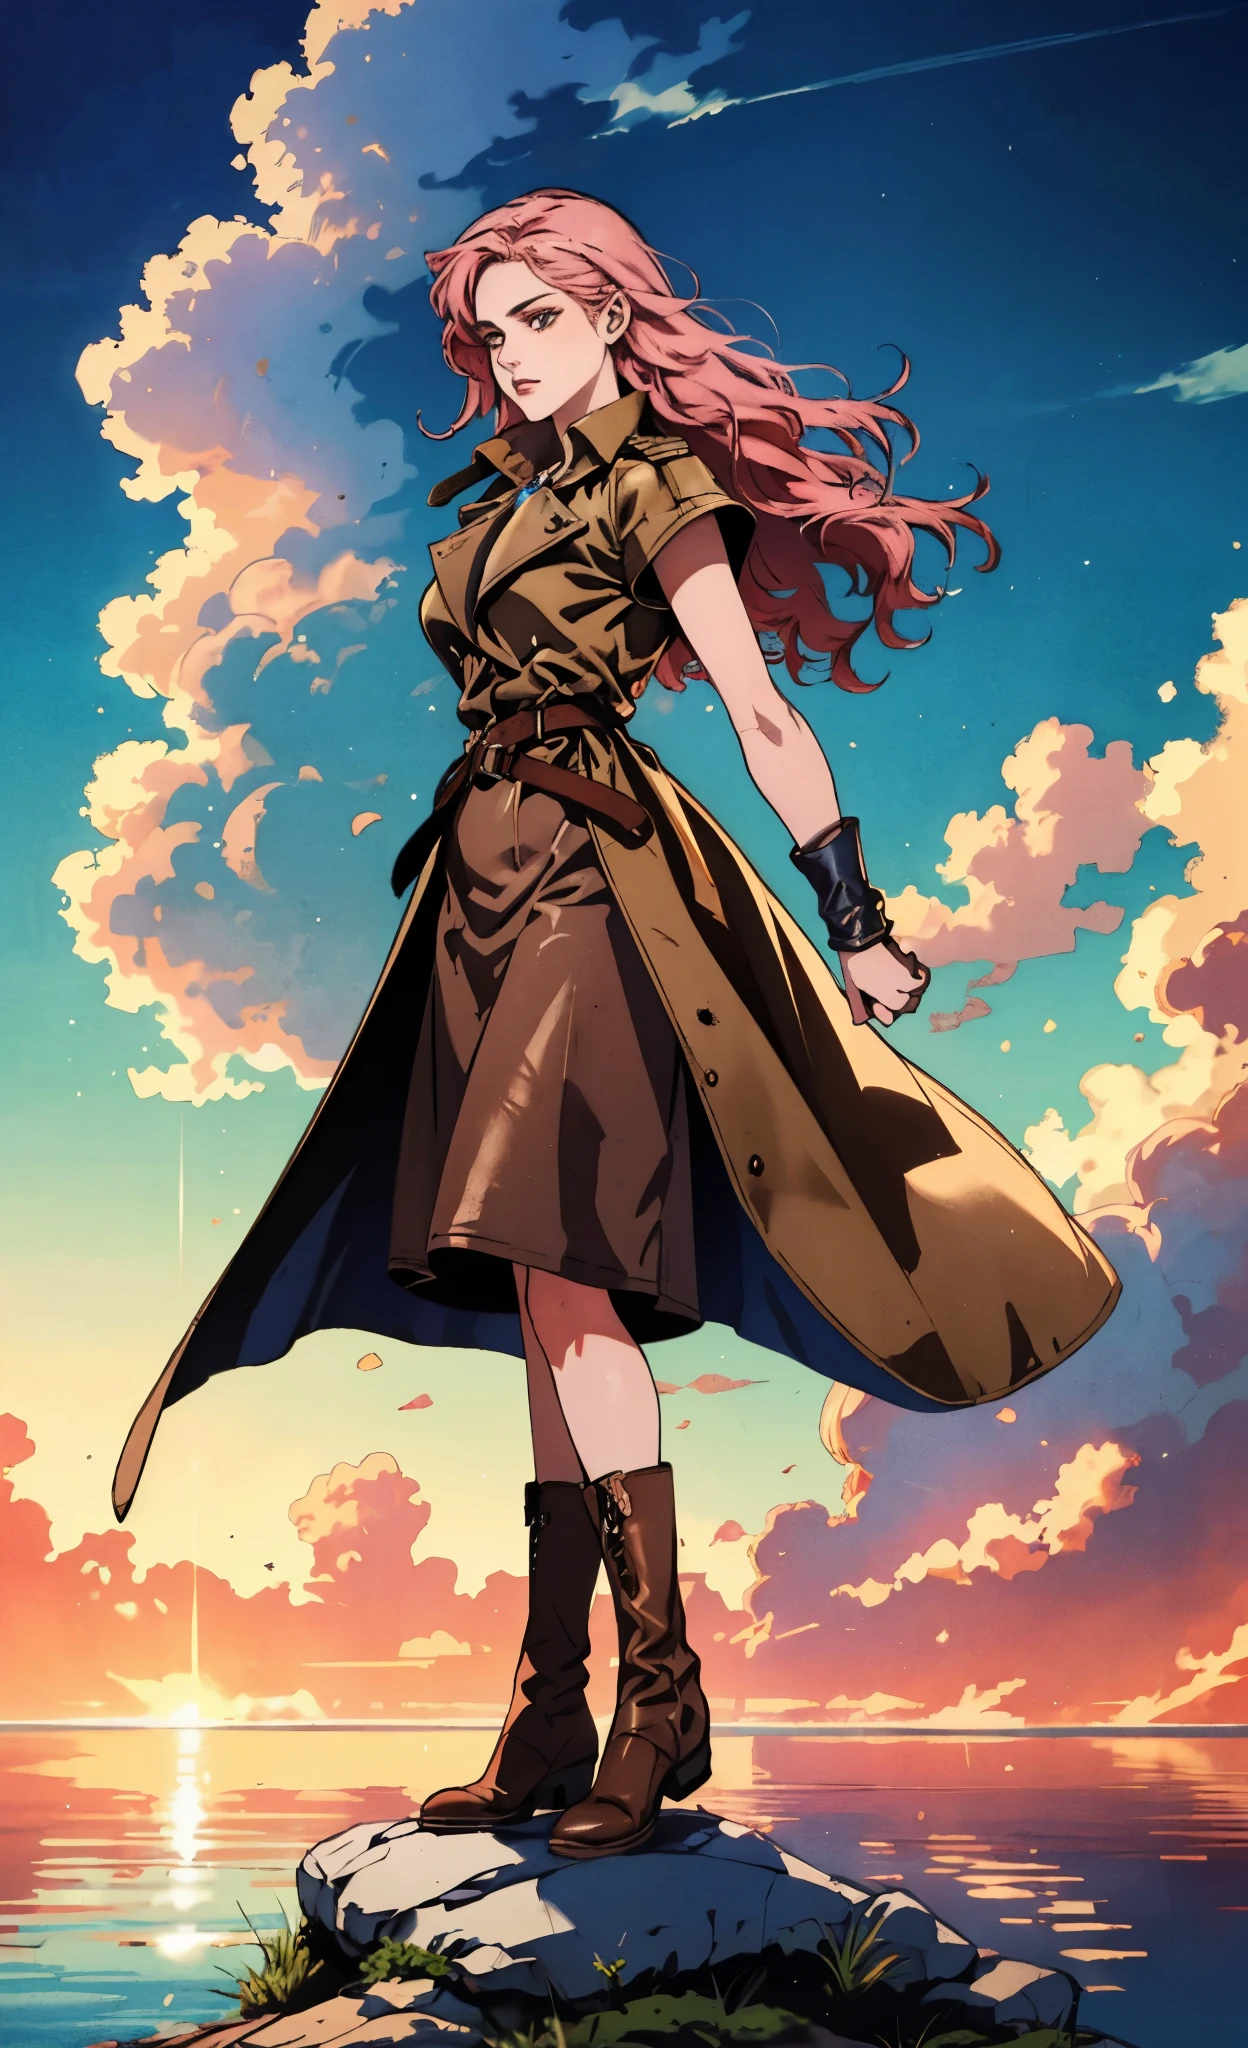 (A beautiful young girl with long curly pink hair, slender eyebrows, sparkling eyes, a bewildered expression, an oval-shapedl face with pale skin, a knee-length form-fitting leather trench coat with very short sleeves, she adorns both hands with metallic wrist guards in a sci-fi ancient civilization style, her long legs are clad in leather boots as she soars through the misty clouds), this character embodies a finely crafted fantasy-realism style western ranger in anime style, exquisite and mature manga art style, porcelain skin, perfect skin, perfect eyes, high definition, best quality, highres, ultra-detailed, ultra-fine painting, extremely delicate, professional, anatomically correct, symmetrical face, extremely detailed eyes and face, high quality eyes, creativity, RAW photo, UHD, 32k, Natural light, cinematic lighting, masterpiece-anatomy-perfect, masterpiece:1.5